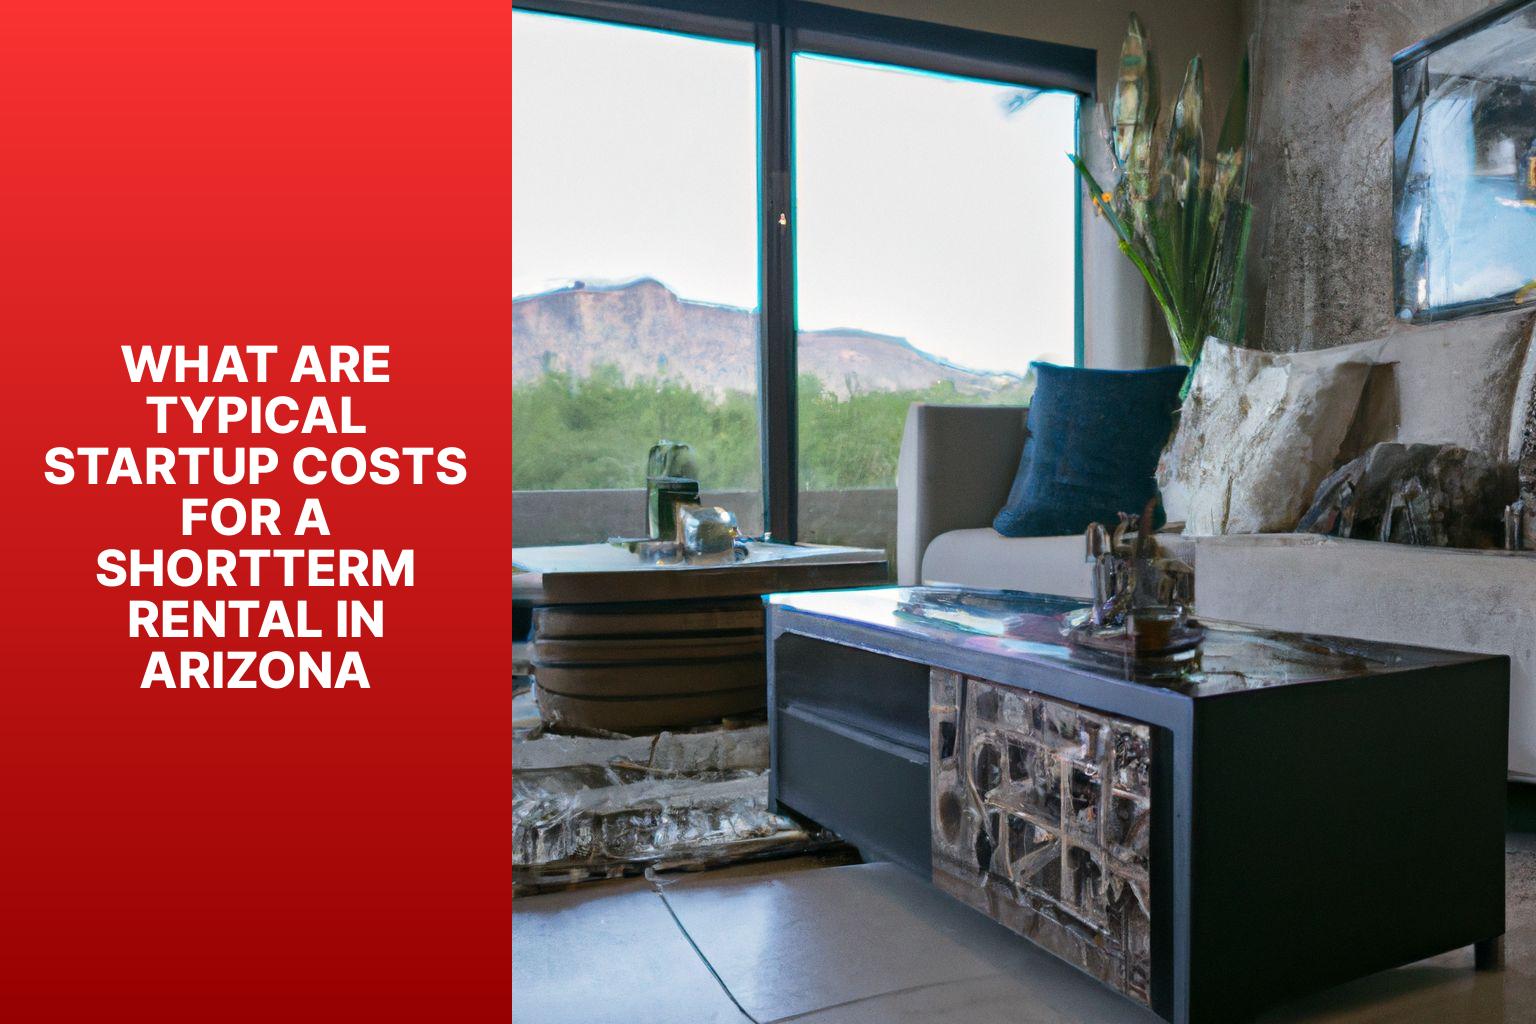 What are typical startup costs for a shortterm rental in Arizona